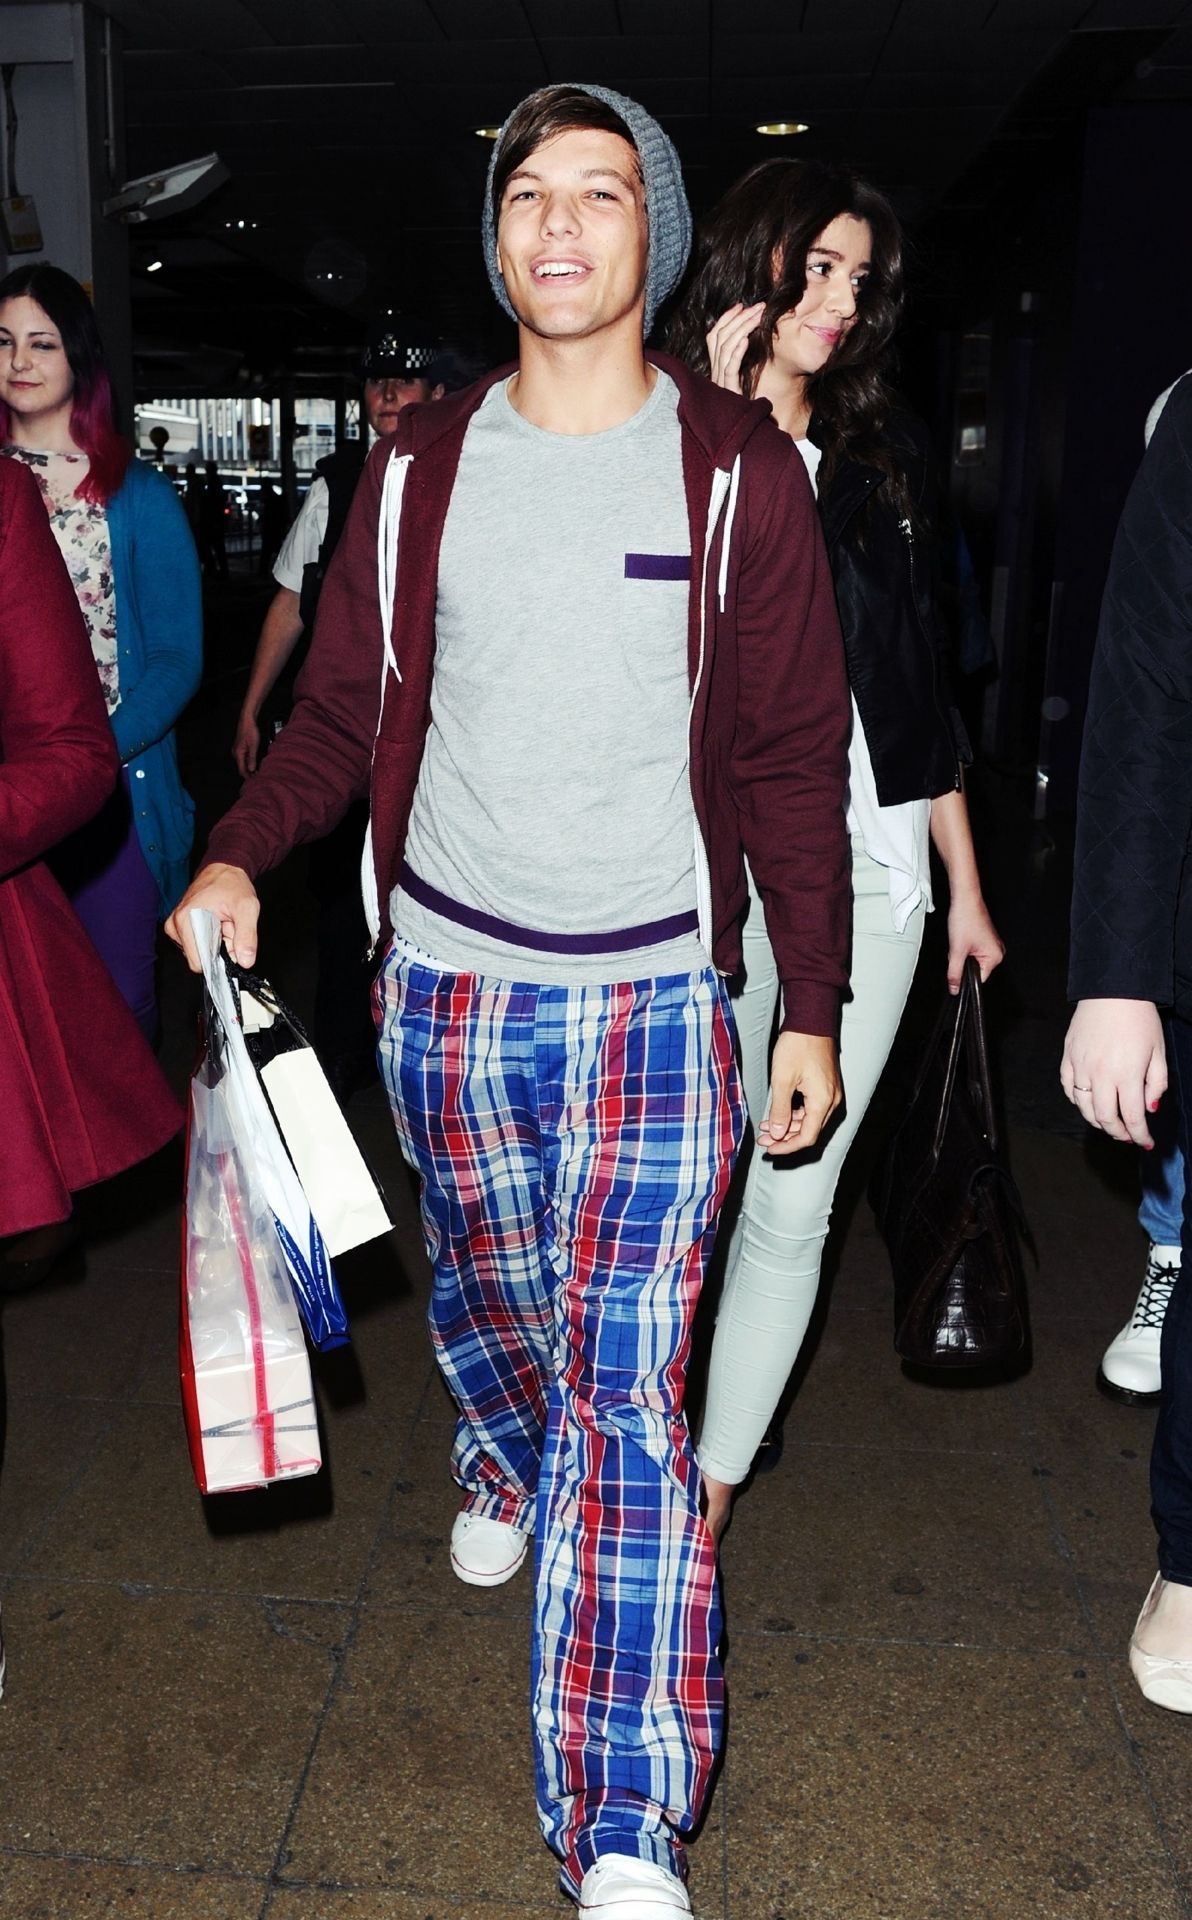 Louis Tomlinson Of One Direction At Air Port #LouisTomlinson #OneDirection #AirP